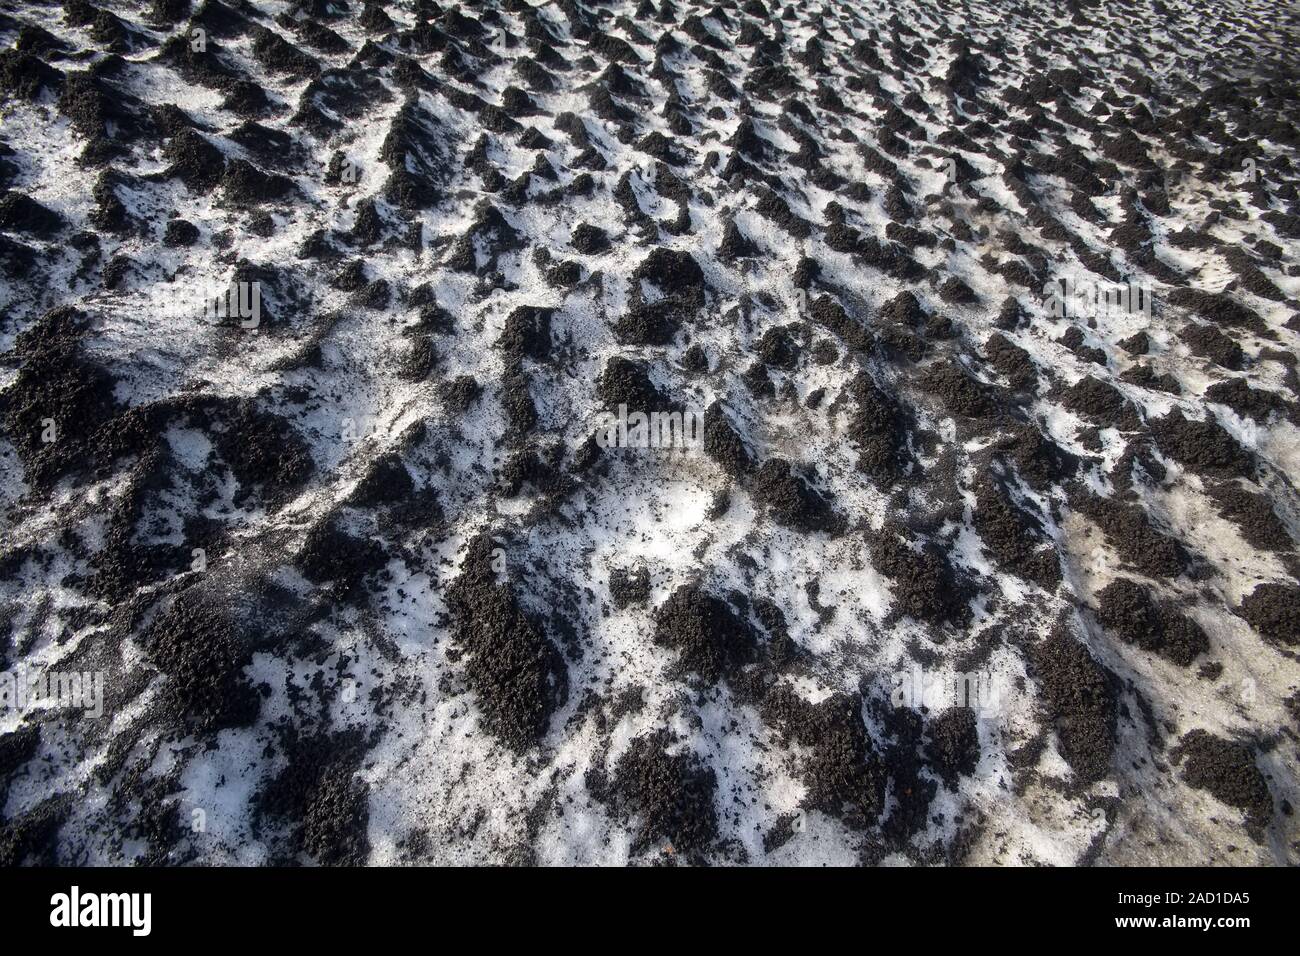 Black snow 2. Direct allegory of human pollution of the Earth. Concept of combining opposite Stock Photo